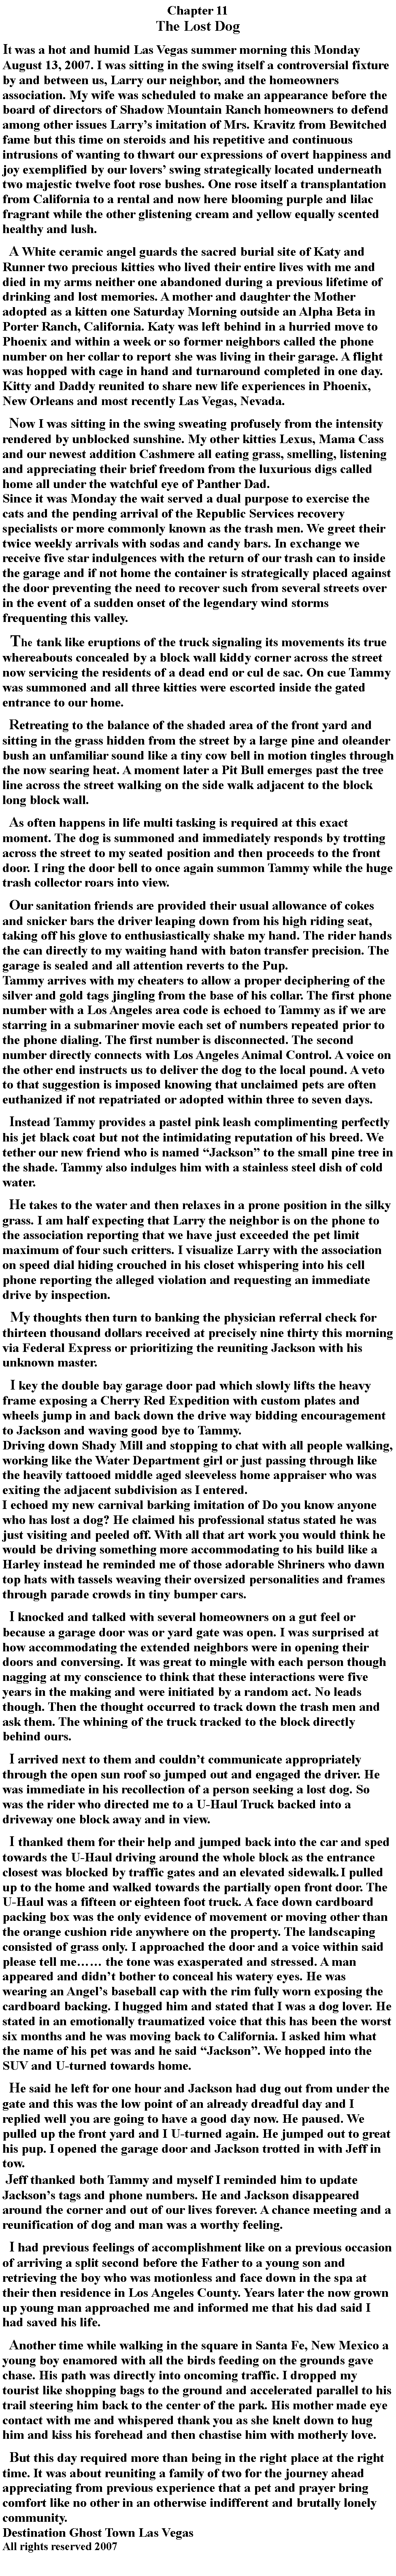 Text Box: Chapter 11The Lost DogIt was a hot and humid Las Vegas summer morning this Monday August 13, 2007. I was sitting in the swing itself a controversial fixture by and between us, Larry our neighbor, and the homeowners association. My wife was scheduled to make an appearance before the board of directors of Shadow Mountain Ranch homeowners to defend among other issues Larry’s imitation of Mrs. Kravitz from Bewitched fame but this time on steroids and his repetitive and continuous intrusions of wanting to thwart our expressions of overt happiness and joy exemplified by our lovers’ swing strategically located underneath two majestic twelve foot rose bushes. One rose itself a transplantation from California to a rental and now here blooming purple and lilac fragrant while the other glistening cream and yellow equally scented healthy and lush.  A White ceramic angel guards the sacred burial site of Katy and Runner two precious kitties who lived their entire lives with me and died in my arms neither one abandoned during a previous lifetime of drinking and lost memories. A mother and daughter the Mother adopted as a kitten one Saturday Morning outside an Alpha Beta in Porter Ranch, California. Katy was left behind in a hurried move to Phoenix and within a week or so former neighbors called the phone number on her collar to report she was living in their garage. A flight was hopped with cage in hand and turnaround completed in one day. Kitty and Daddy reunited to share new life experiences in Phoenix, New Orleans and most recently Las Vegas, Nevada.  Now I was sitting in the swing sweating profusely from the intensity rendered by unblocked sunshine. My other kitties Lexus, Mama Cass and our newest addition Cashmere all eating grass, smelling, listening and appreciating their brief freedom from the luxurious digs called home all under the watchful eye of Panther Dad.Since it was Monday the wait served a dual purpose to exercise the cats and the pending arrival of the Republic Services recovery specialists or more commonly known as the trash men. We greet their twice weekly arrivals with sodas and candy bars. In exchange we receive five star indulgences with the return of our trash can to inside the garage and if not home the container is strategically placed against the door preventing the need to recover such from several streets over in the event of a sudden onset of the legendary wind storms frequenting this valley.  The tank like eruptions of the truck signaling its movements its true whereabouts concealed by a block wall kiddy corner across the street now servicing the residents of a dead end or cul de sac. On cue Tammy was summoned and all three kitties were escorted inside the gated entrance to our home.  Retreating to the balance of the shaded area of the front yard and sitting in the grass hidden from the street by a large pine and oleander bush an unfamiliar sound like a tiny cow bell in motion tingles through the now searing heat. A moment later a Pit Bull emerges past the tree line across the street walking on the side walk adjacent to the block long block wall.  As often happens in life multi tasking is required at this exact moment. The dog is summoned and immediately responds by trotting across the street to my seated position and then proceeds to the front door. I ring the door bell to once again summon Tammy while the huge trash collector roars into view.  Our sanitation friends are provided their usual allowance of cokes and snicker bars the driver leaping down from his high riding seat, taking off his glove to enthusiastically shake my hand. The rider hands the can directly to my waiting hand with baton transfer precision. The garage is sealed and all attention reverts to the Pup.Tammy arrives with my cheaters to allow a proper deciphering of the silver and gold tags jingling from the base of his collar. The first phone number with a Los Angeles area code is echoed to Tammy as if we are starring in a submariner movie each set of numbers repeated prior to the phone dialing. The first number is disconnected. The second number directly connects with Los Angeles Animal Control. A voice on the other end instructs us to deliver the dog to the local pound. A veto to that suggestion is imposed knowing that unclaimed pets are often euthanized if not repatriated or adopted within three to seven days.  Instead Tammy provides a pastel pink leash complimenting perfectly his jet black coat but not the intimidating reputation of his breed. We tether our new friend who is named “Jackson” to the small pine tree in the shade. Tammy also indulges him with a stainless steel dish of cold water.  He takes to the water and then relaxes in a prone position in the silky grass. I am half expecting that Larry the neighbor is on the phone to the association reporting that we have just exceeded the pet limit maximum of four such critters. I visualize Larry with the association on speed dial hiding crouched in his closet whispering into his cell phone reporting the alleged violation and requesting an immediate drive by inspection.  My thoughts then turn to banking the physician referral check for thirteen thousand dollars received at precisely nine thirty this morning via Federal Express or prioritizing the reuniting Jackson with his unknown master.  I key the double bay garage door pad which slowly lifts the heavy frame exposing a Cherry Red Expedition with custom plates and wheels jump in and back down the drive way bidding encouragement to Jackson and waving good bye to Tammy.Driving down Shady Mill and stopping to chat with all people walking, working like the Water Department girl or just passing through like the heavily tattooed middle aged sleeveless home appraiser who was exiting the adjacent subdivision as I entered.I echoed my new carnival barking imitation of Do you know anyone who has lost a dog? He claimed his professional status stated he was just visiting and peeled off. With all that art work you would think he would be driving something more accommodating to his build like a Harley instead he reminded me of those adorable Shriners who dawn top hats with tassels weaving their oversized personalities and frames through parade crowds in tiny bumper cars.  I knocked and talked with several homeowners on a gut feel or because a garage door was or yard gate was open. I was surprised at how accommodating the extended neighbors were in opening their doors and conversing. It was great to mingle with each person though nagging at my conscience to think that these interactions were five years in the making and were initiated by a random act. No leads though. Then the thought occurred to track down the trash men and ask them. The whining of the truck tracked to the block directly behind ours.  I arrived next to them and couldn’t communicate appropriately through the open sun roof so jumped out and engaged the driver. He was immediate in his recollection of a person seeking a lost dog. So was the rider who directed me to a U-Haul Truck backed into a driveway one block away and in view.  I thanked them for their help and jumped back into the car and sped towards the U-Haul driving around the whole block as the entrance closest was blocked by traffic gates and an elevated sidewalk. I pulled up to the home and walked towards the partially open front door. The U-Haul was a fifteen or eighteen foot truck. A face down cardboard packing box was the only evidence of movement or moving other than the orange cushion ride anywhere on the property. The landscaping consisted of grass only. I approached the door and a voice within said please tell me…… the tone was exasperated and stressed. A man appeared and didn’t bother to conceal his watery eyes. He was wearing an Angel’s baseball cap with the rim fully worn exposing the cardboard backing. I hugged him and stated that I was a dog lover. He stated in an emotionally traumatized voice that this has been the worst six months and he was moving back to California. I asked him what the name of his pet was and he said “Jackson”. We hopped into the SUV and U-turned towards home.  He said he left for one hour and Jackson had dug out from under the gate and this was the low point of an already dreadful day and I replied well you are going to have a good day now. He paused. We pulled up the front yard and I U-turned again. He jumped out to great his pup. I opened the garage door and Jackson trotted in with Jeff in tow.  Jeff thanked both Tammy and myself I reminded him to update Jackson’s tags and phone numbers. He and Jackson disappeared around the corner and out of our lives forever. A chance meeting and a reunification of dog and man was a worthy feeling.  I had previous feelings of accomplishment like on a previous occasion of arriving a split second before the Father to a young son and retrieving the boy who was motionless and face down in the spa at their then residence in Los Angeles County. Years later the now grown up young man approached me and informed me that his dad said I had saved his life.  Another time while walking in the square in Santa Fe, New Mexico a young boy enamored with all the birds feeding on the grounds gave chase. His path was directly into oncoming traffic. I dropped my tourist like shopping bags to the ground and accelerated parallel to his trail steering him back to the center of the park. His mother made eye contact with me and whispered thank you as she knelt down to hug him and kiss his forehead and then chastise him with motherly love.  But this day required more than being in the right place at the right time. It was about reuniting a family of two for the journey ahead appreciating from previous experience that a pet and prayer bring comfort like no other in an otherwise indifferent and brutally lonely community.Destination Ghost Town Las VegasAll rights reserved 2007